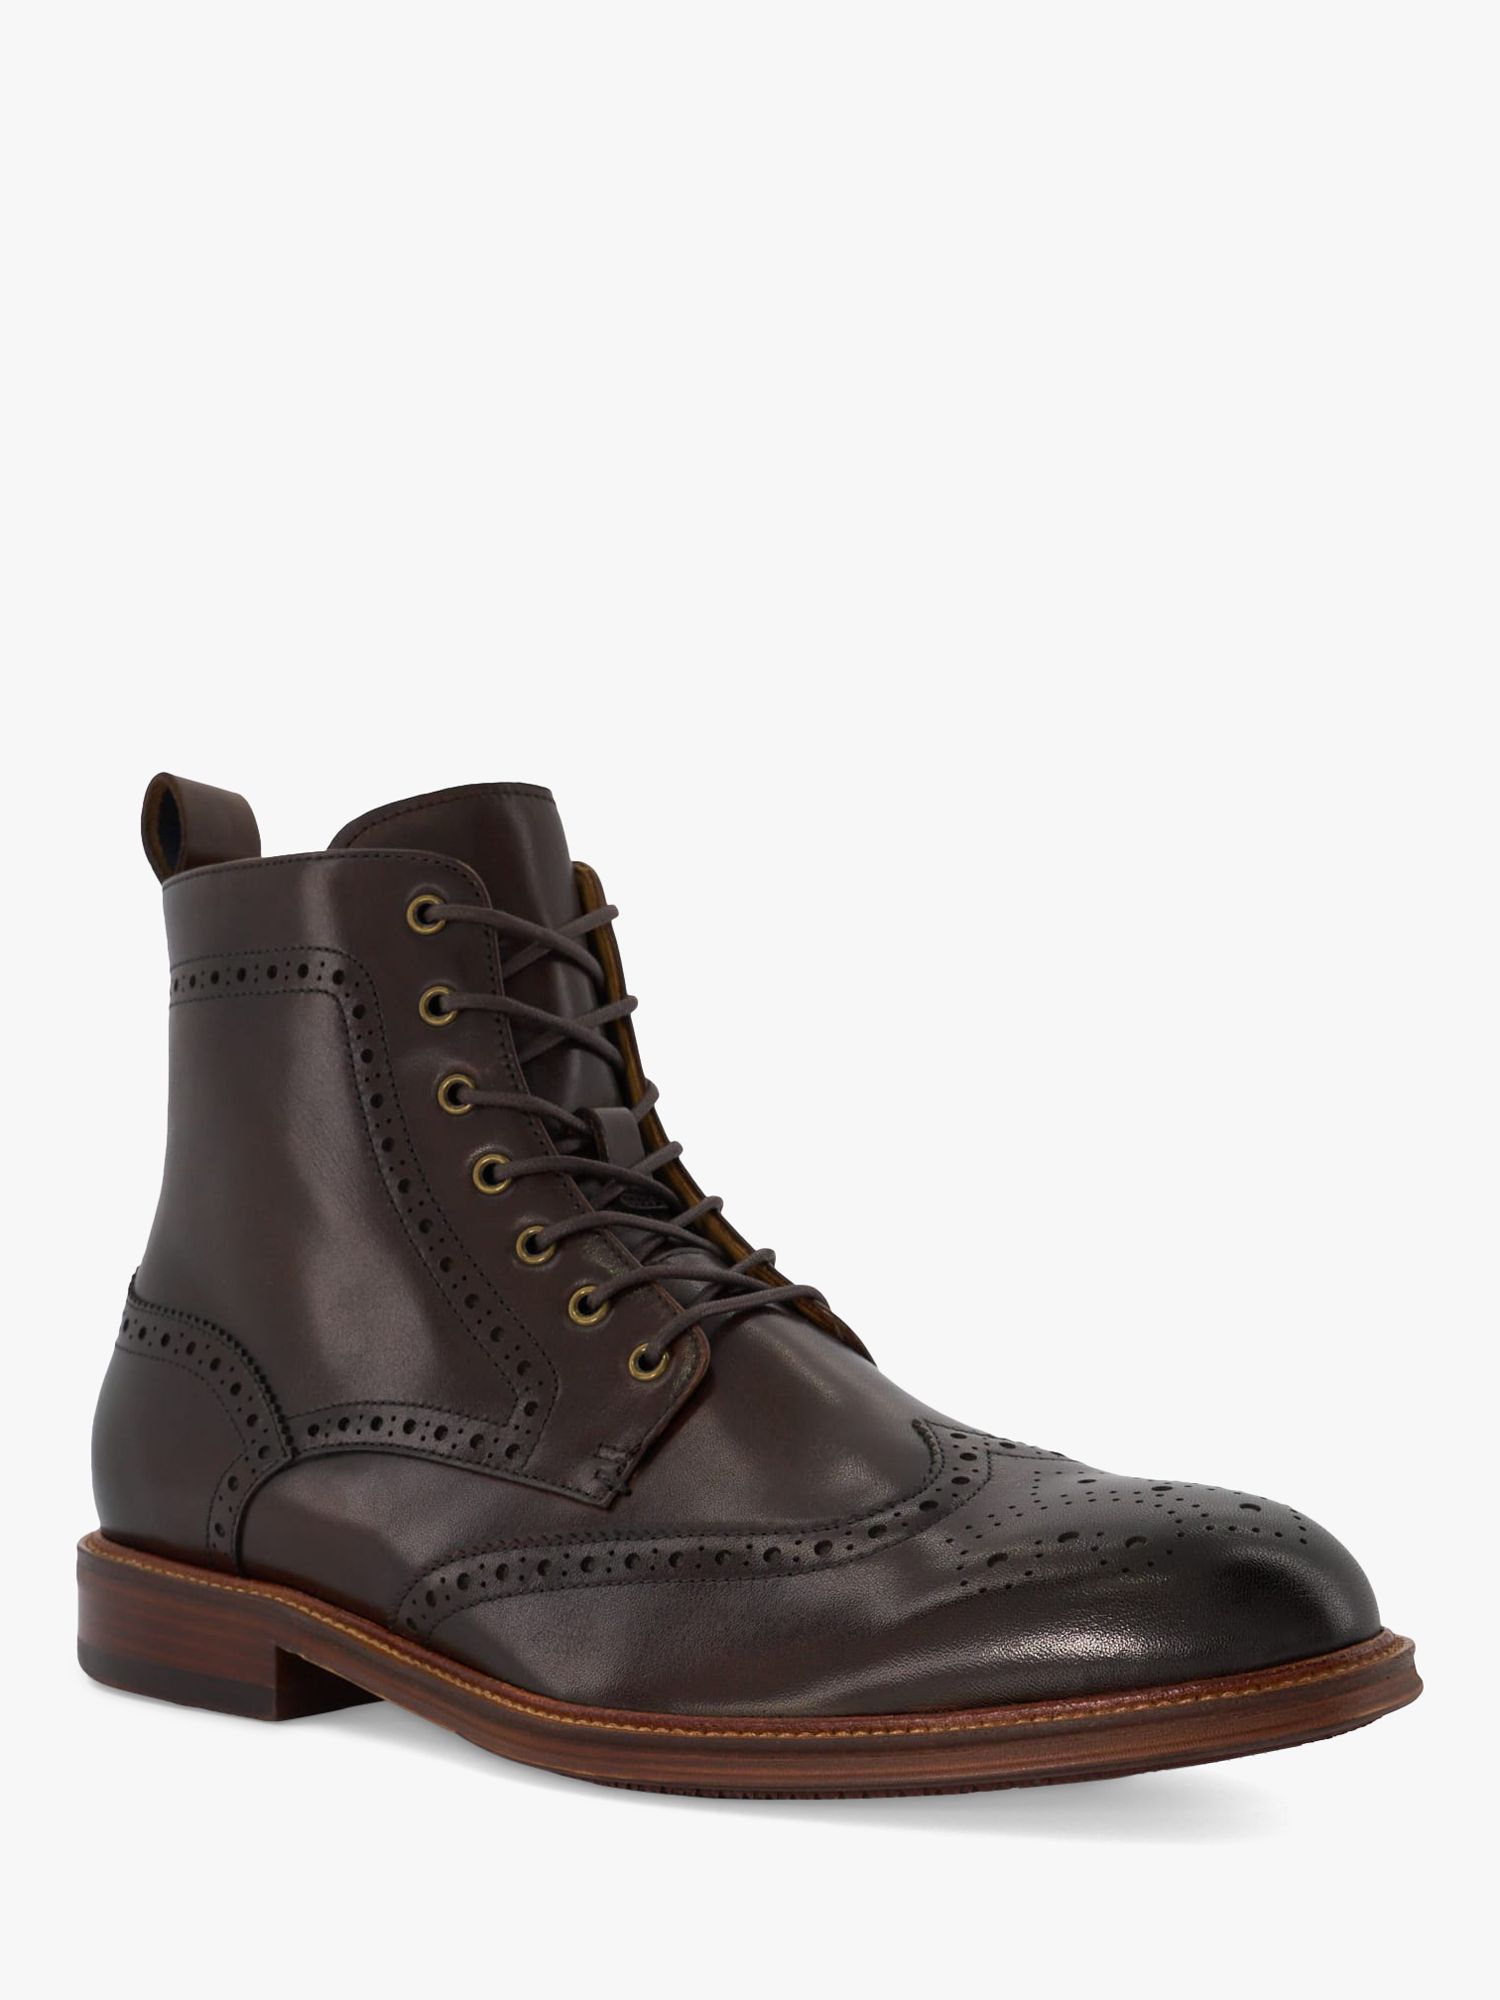 Dune Morrals Lace Up Brogue Boots, Brown-leather at John Lewis & Partners